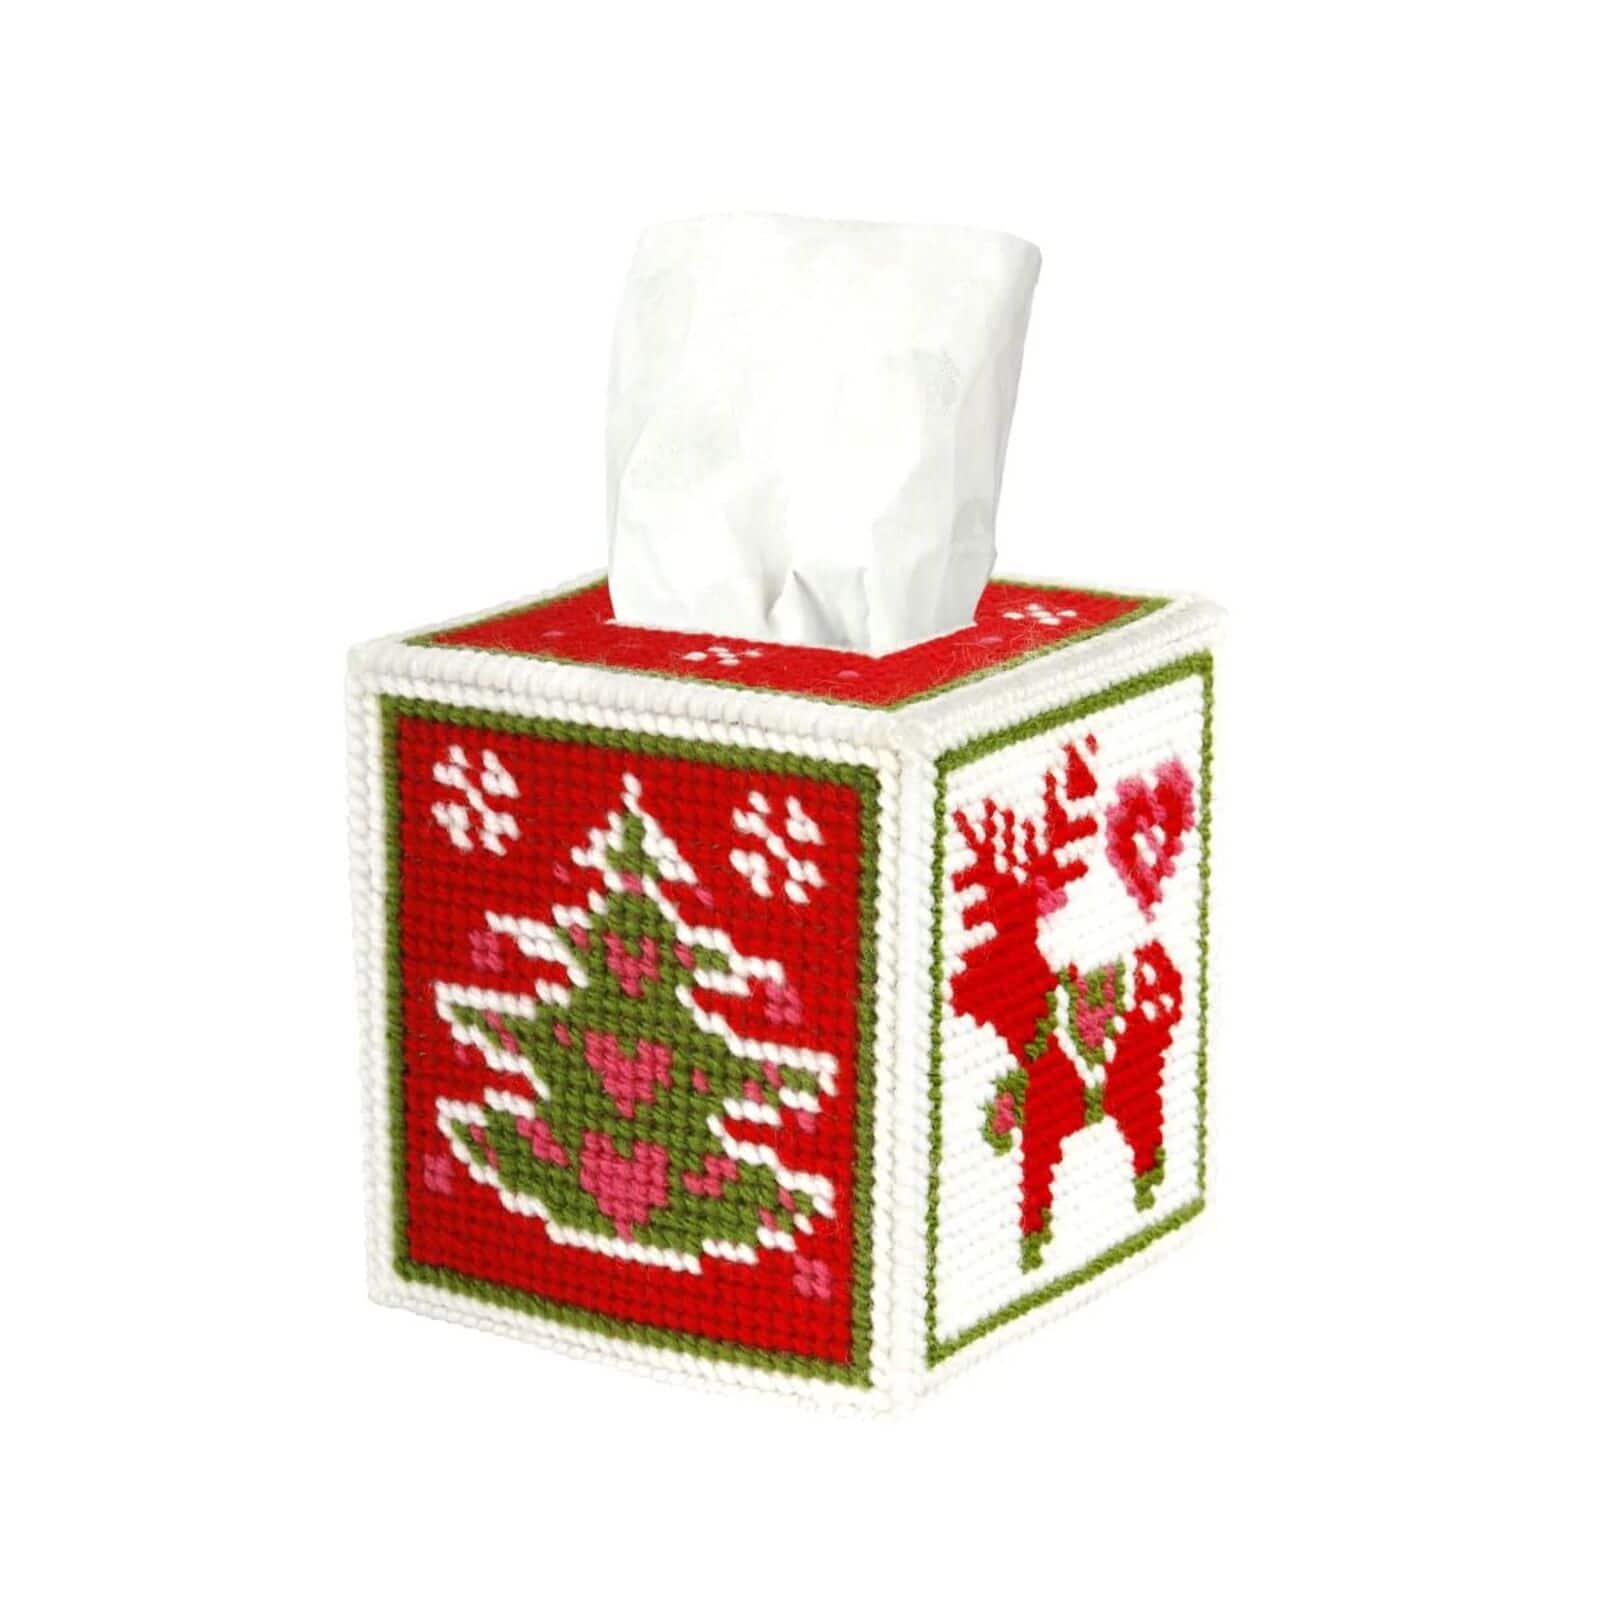 Orchidea Tissue Box Cover - Needlepoint (Halfstitch) Kit Christmas Time